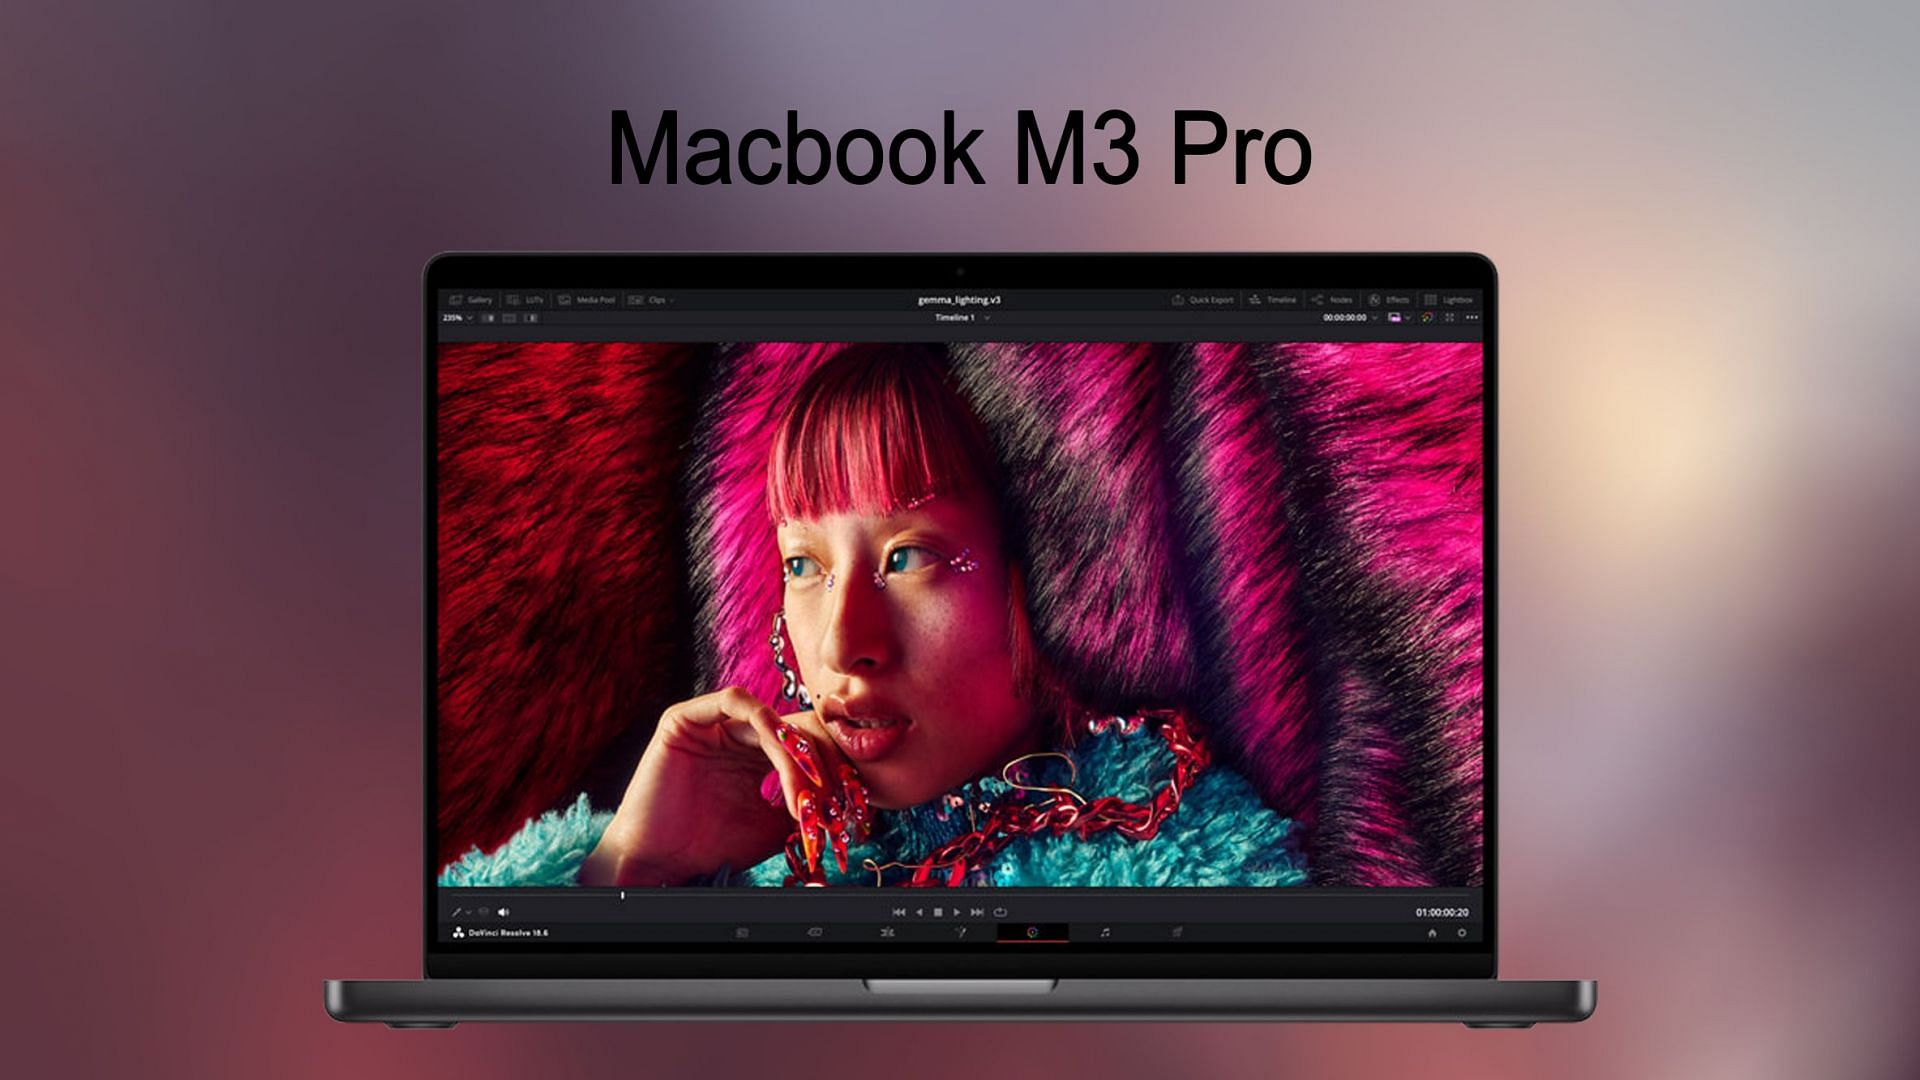 A detailed explanation on why you should buy the Macbook M3 Pro (Image via Apple)